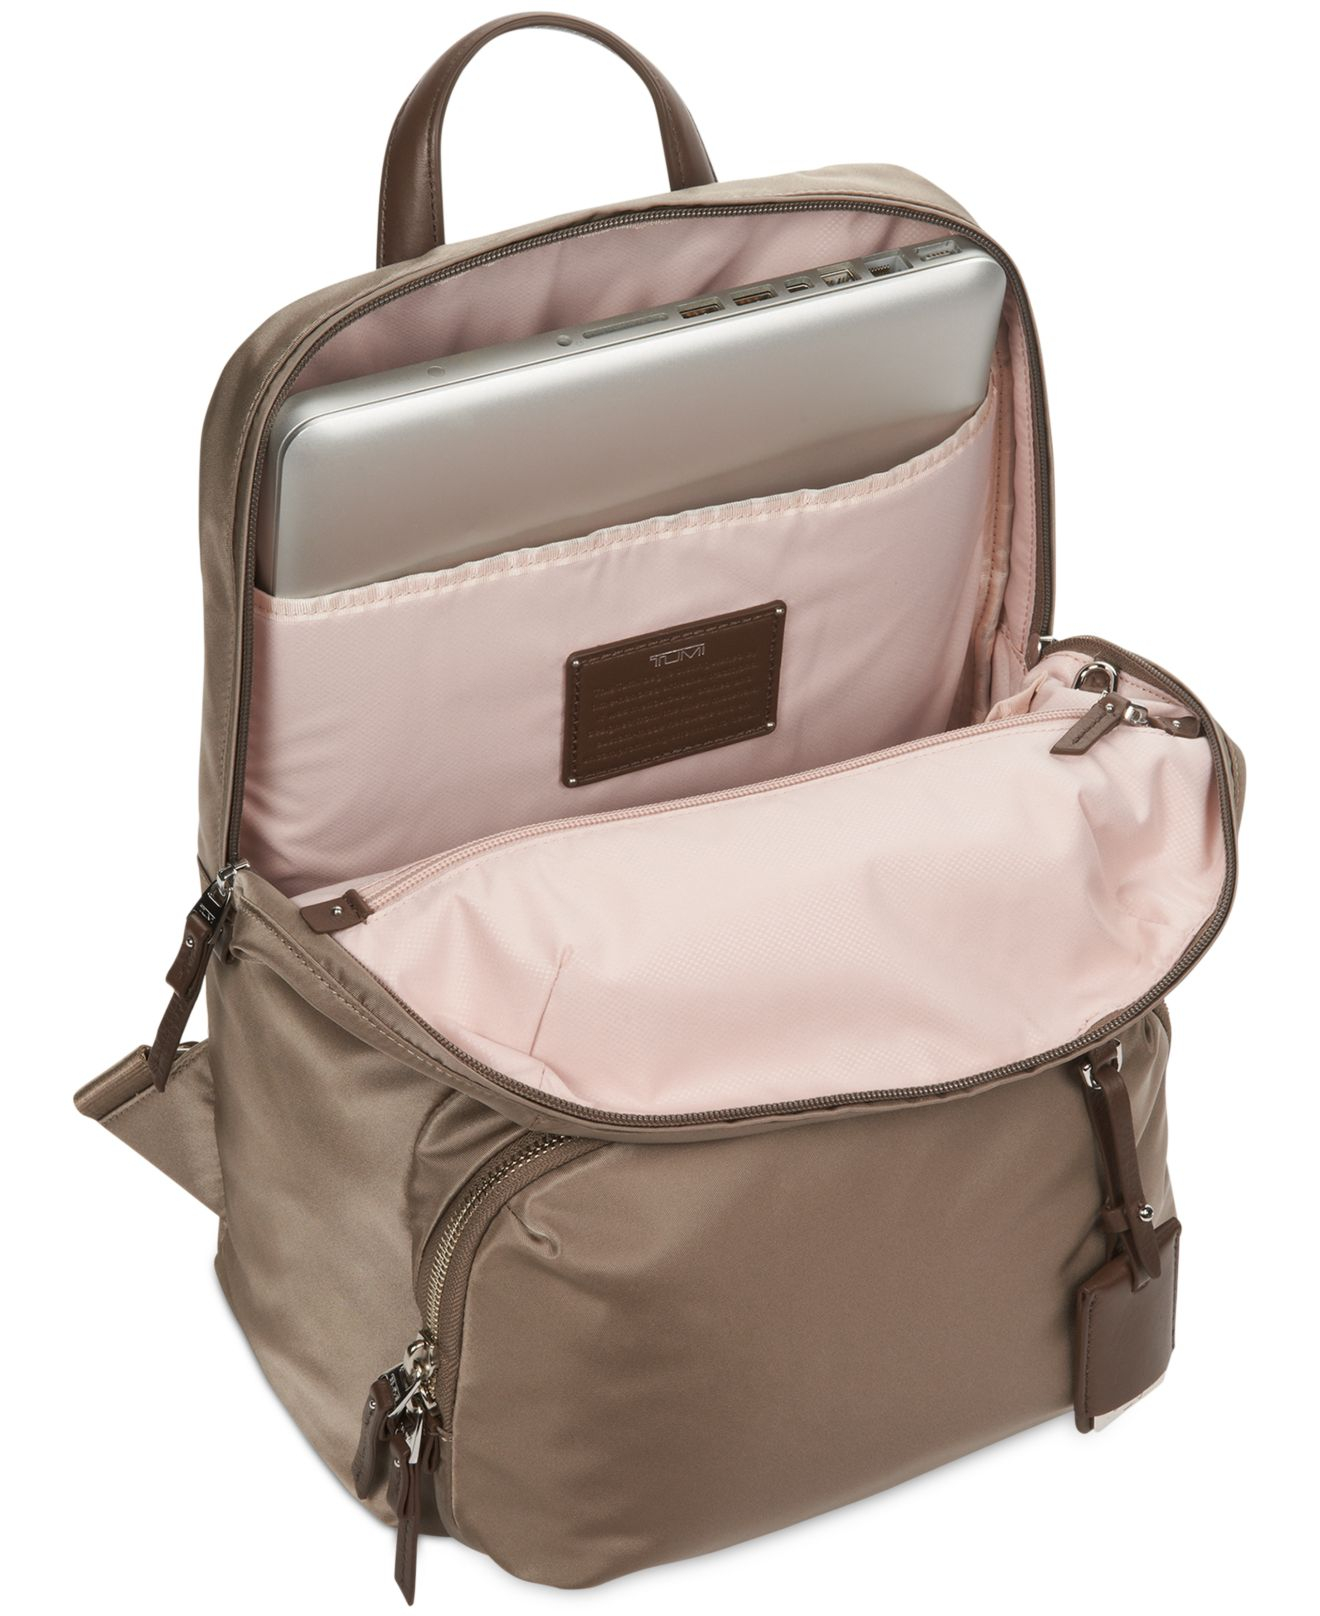 Tumi Voyageur Halle Backpack in Natural | Lyst